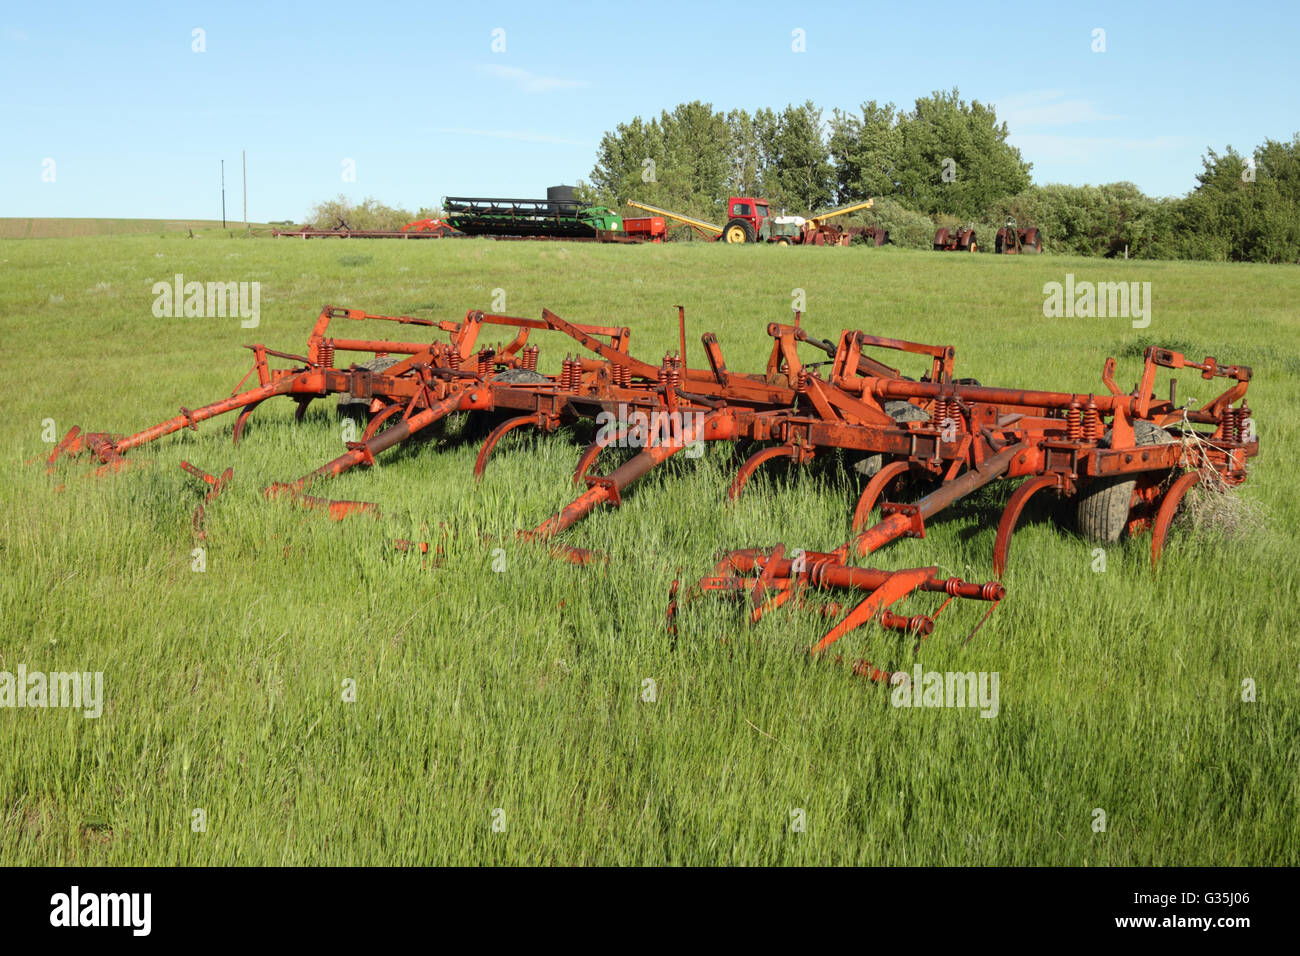 A Co-op cultivator with harrows in Alberta, Canada. Stock Photo